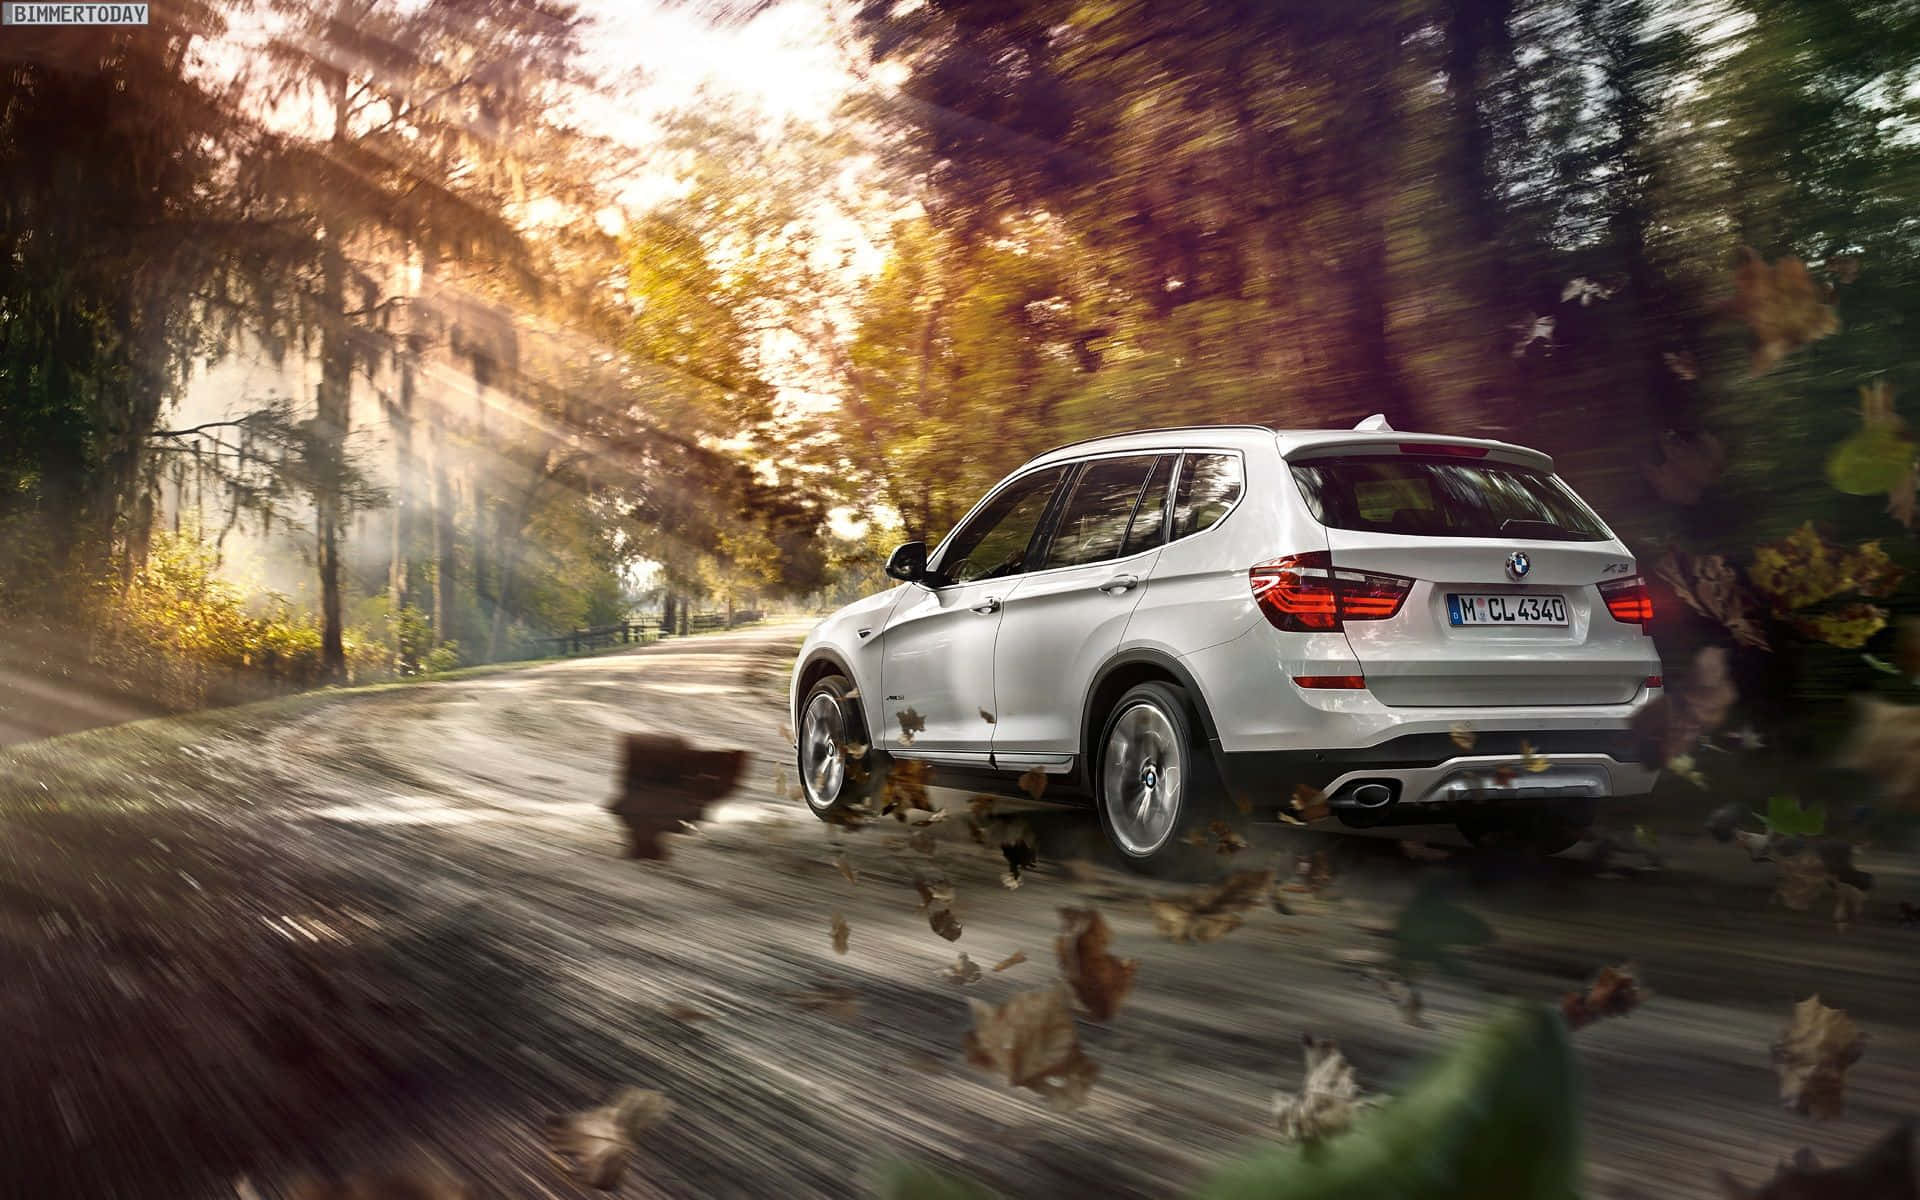 BMW X3 on a Scenic Background Wallpaper